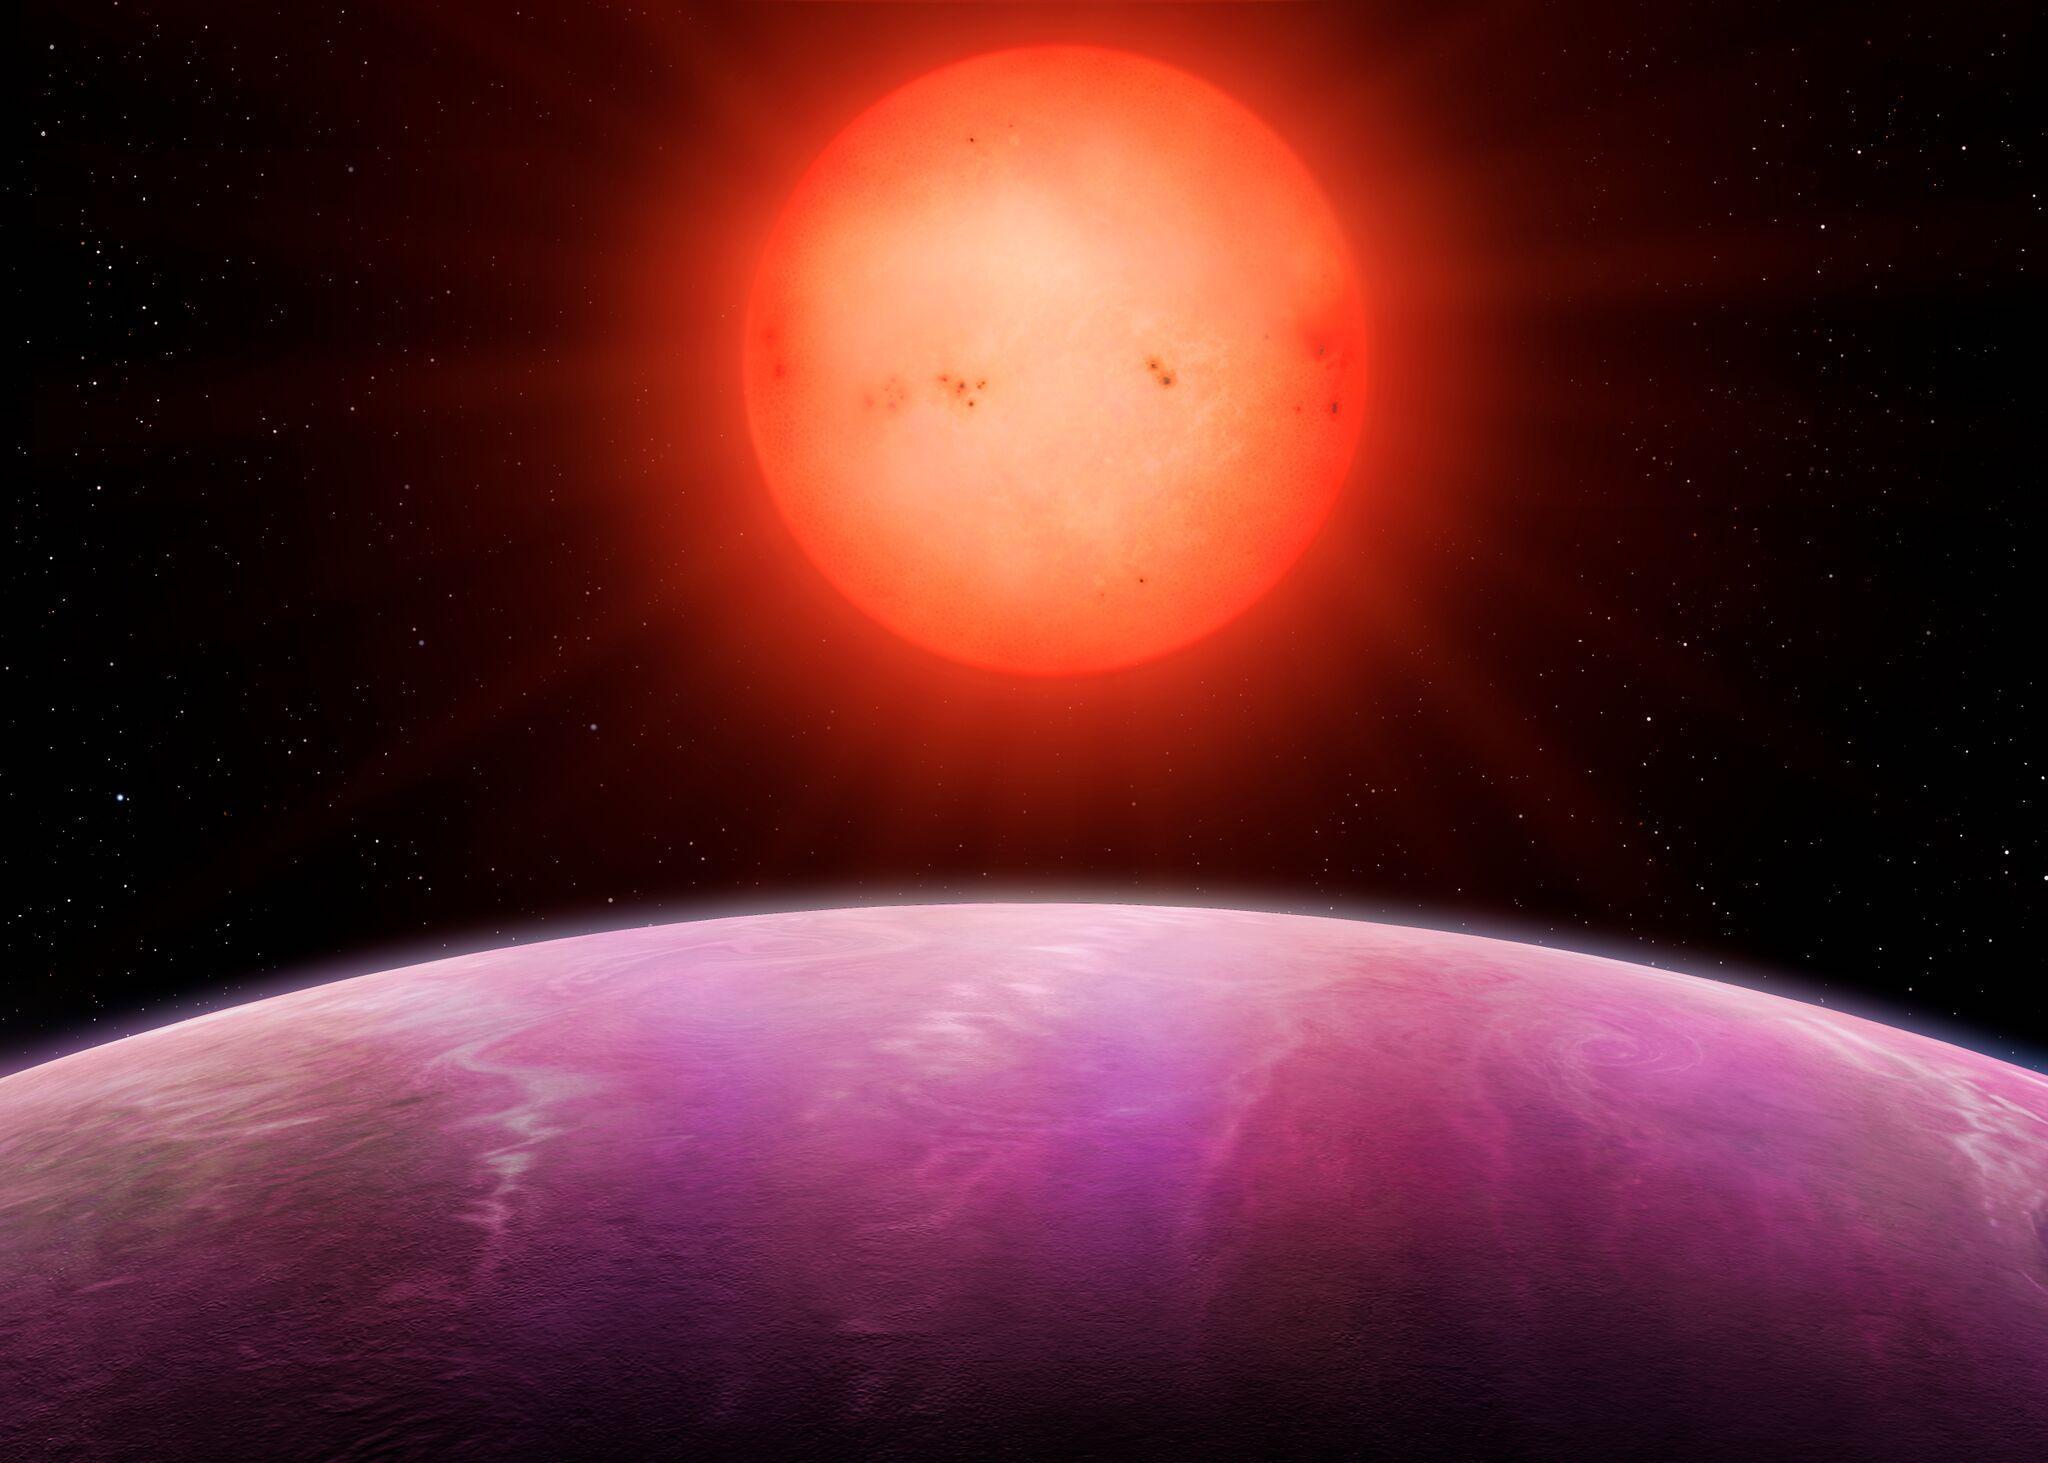 The very small sun rises over the unusually large "monster" planet